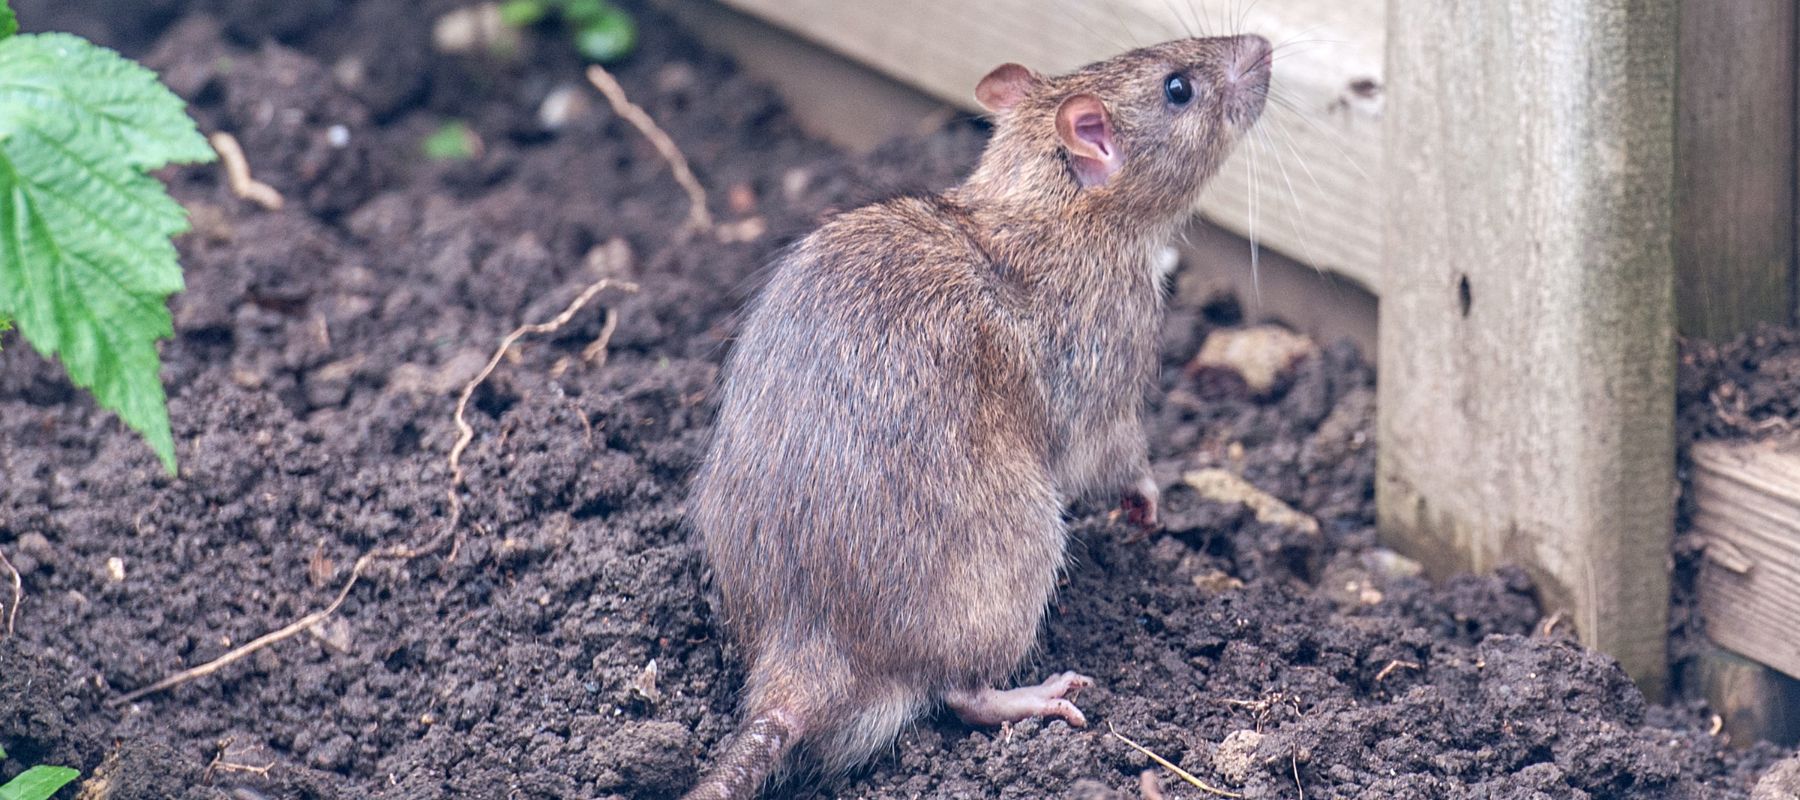 Rodents in the garden